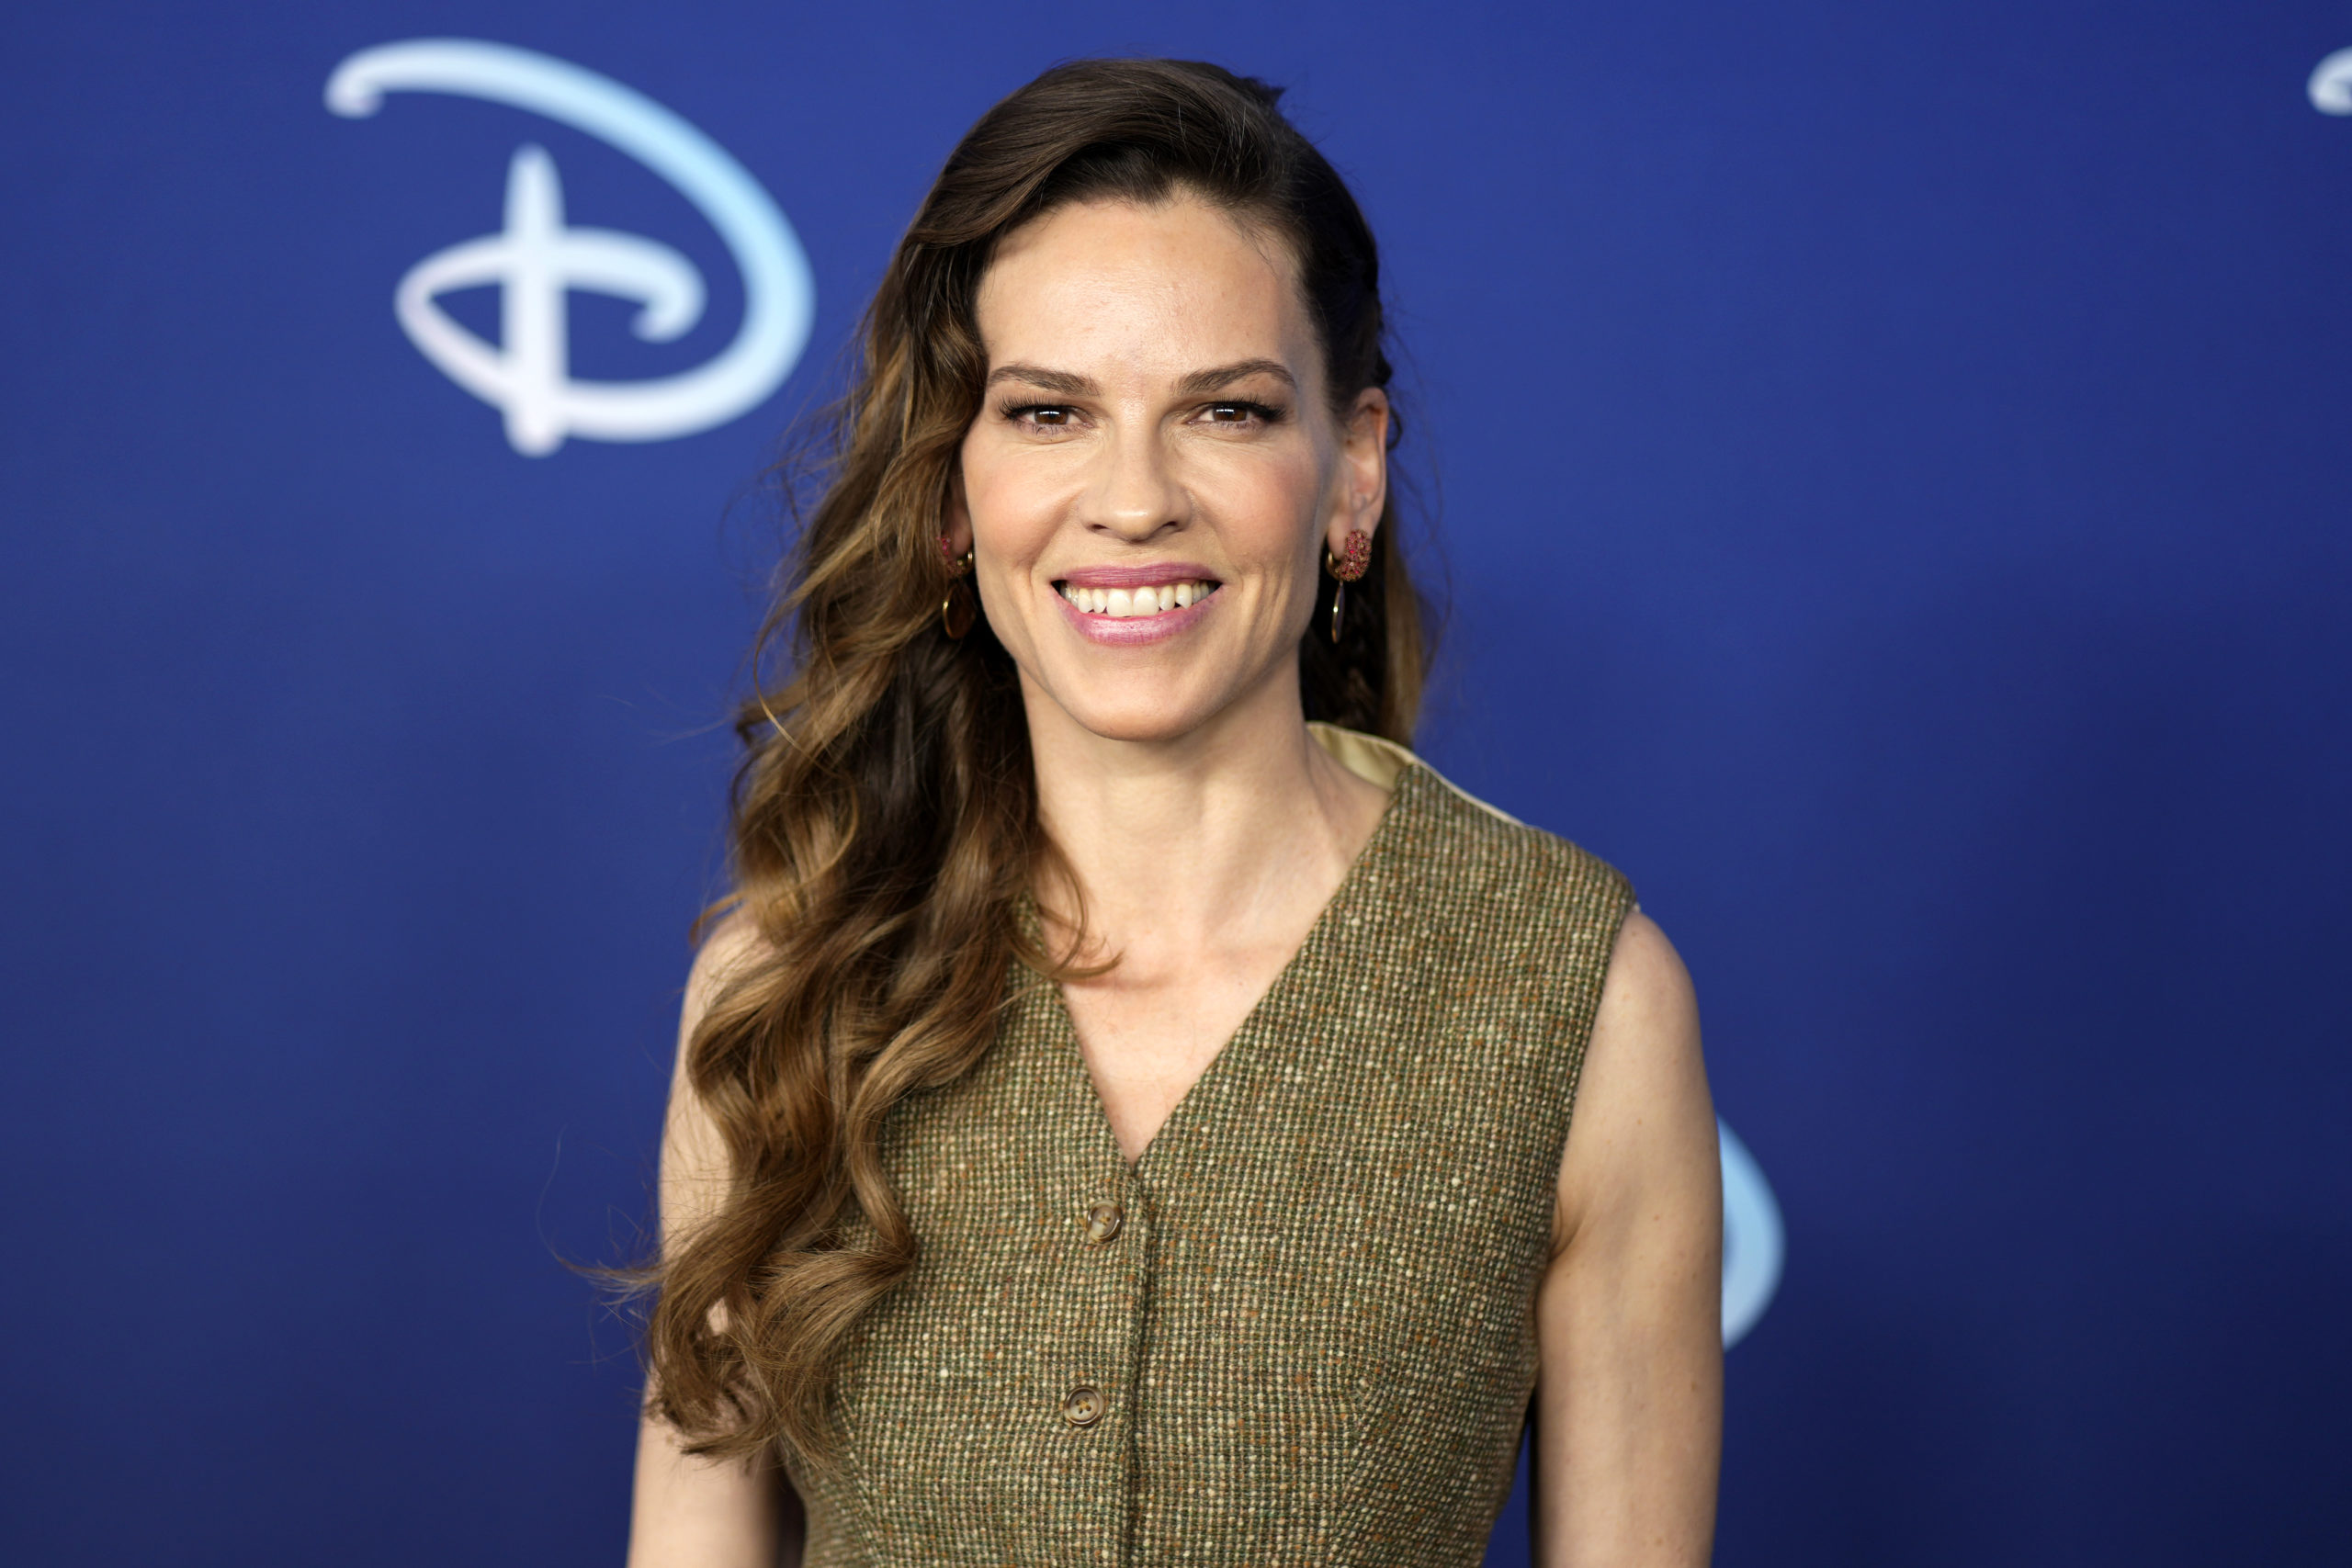 Hilary Swank attends the Disney 2022 Upfront presentation in New York City on May 17, 2022.